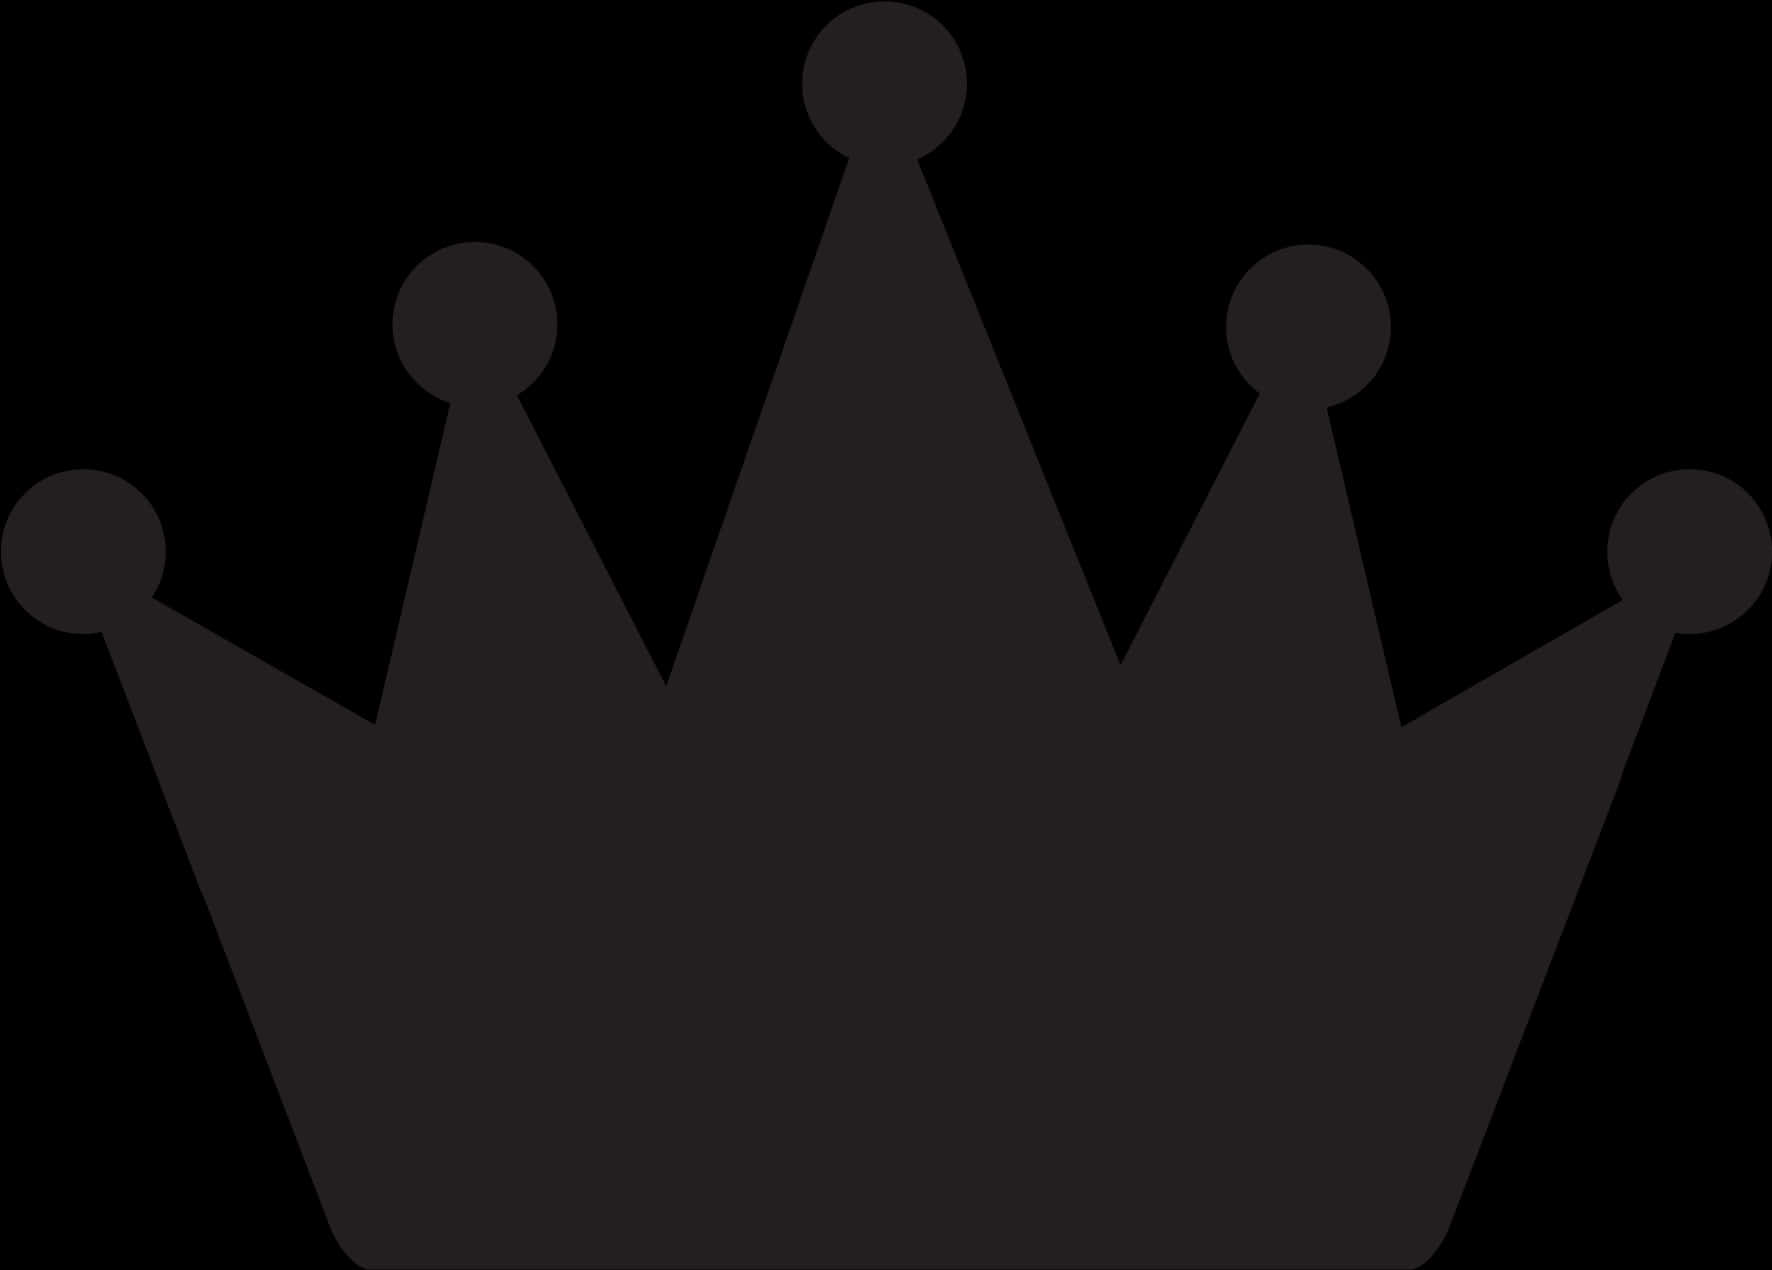 A Black Crown With Pointy Edges